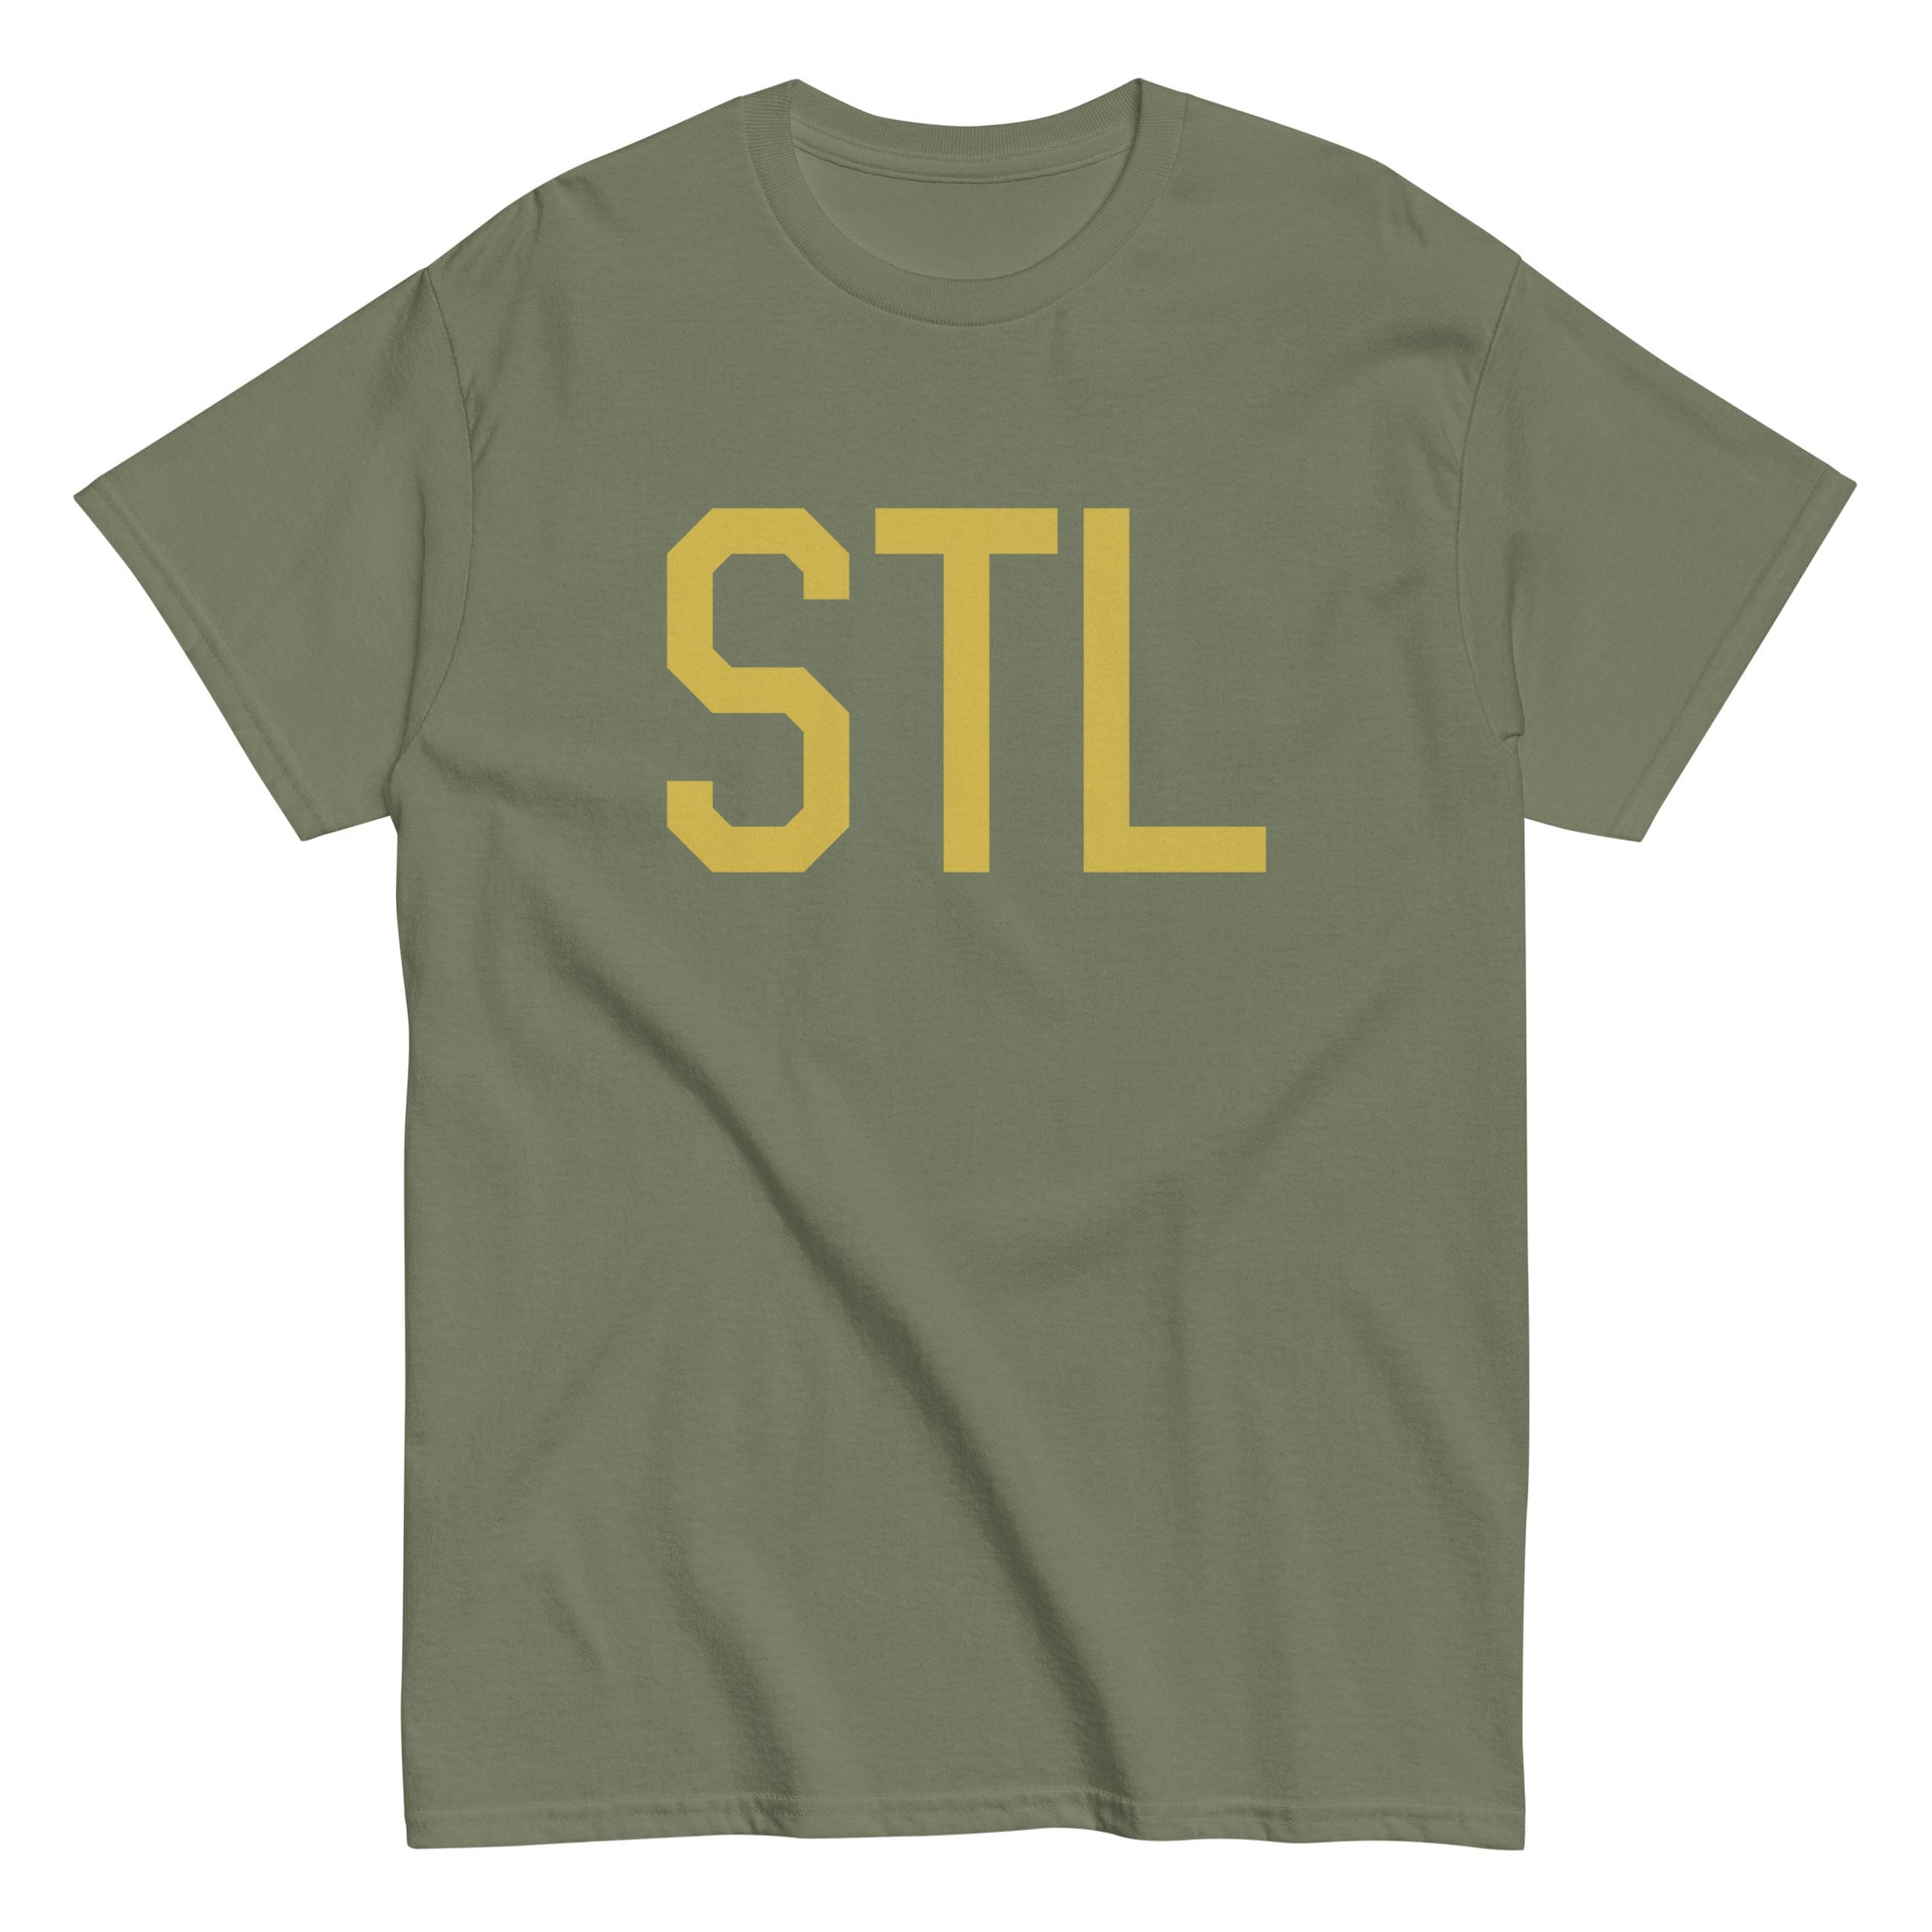 Aviation Enthusiast Men's Tee - Old Gold Graphic • STL St. Louis • YHM Designs - Image 02